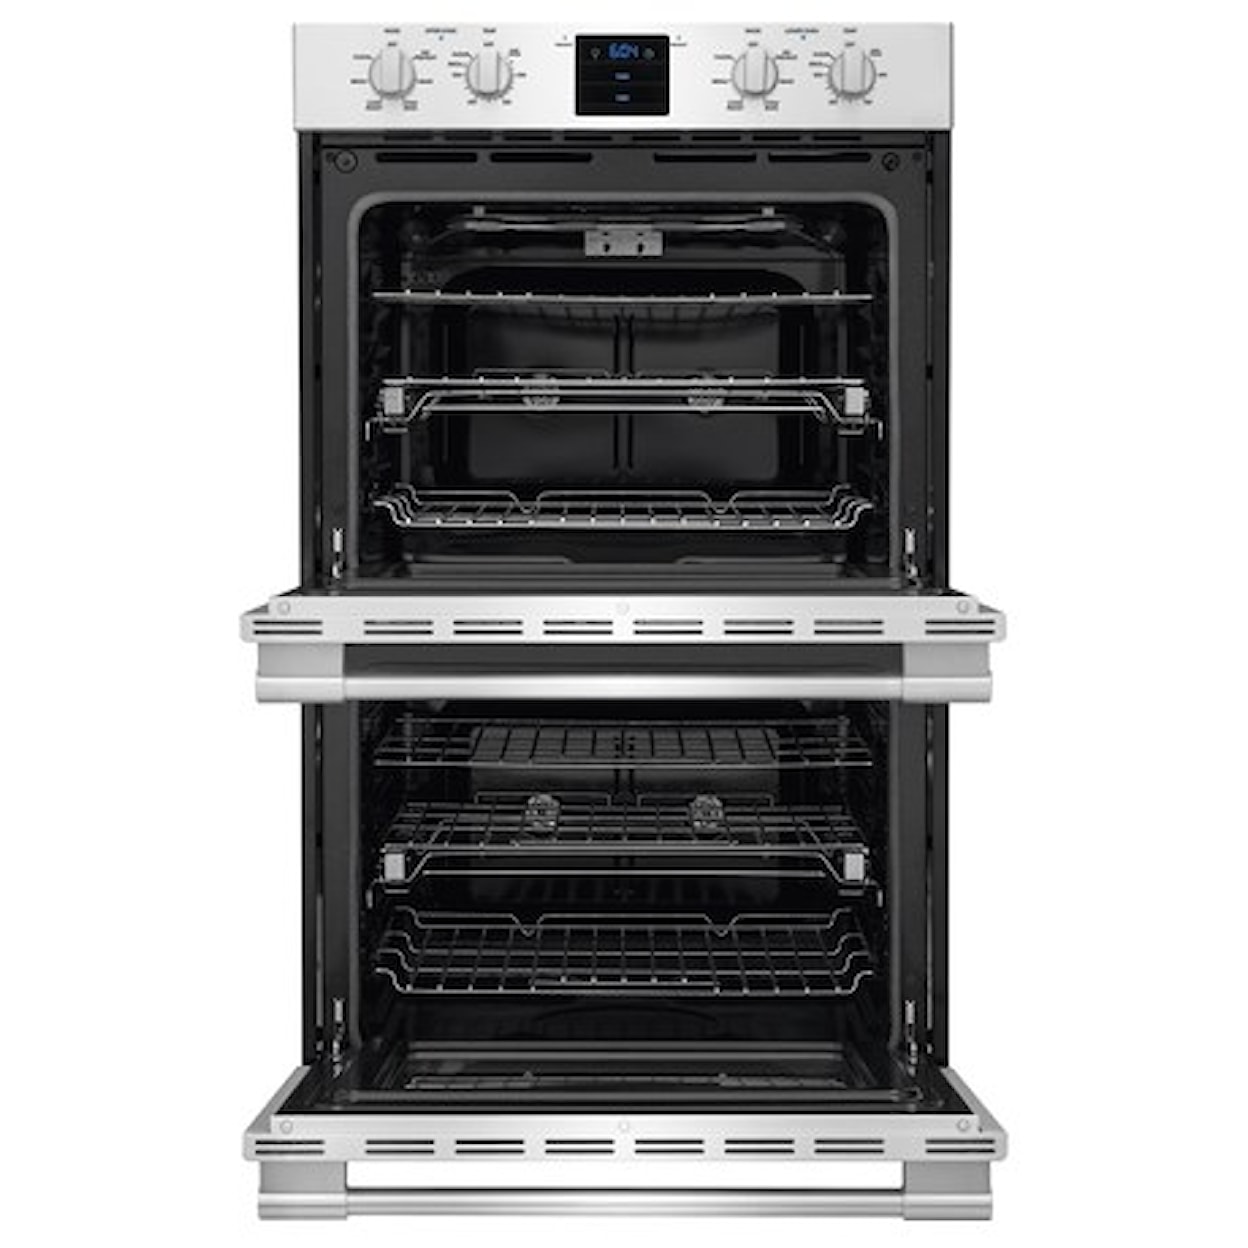 Frigidaire Professional Collection - Ovens 30" Double Electric Wall Oven